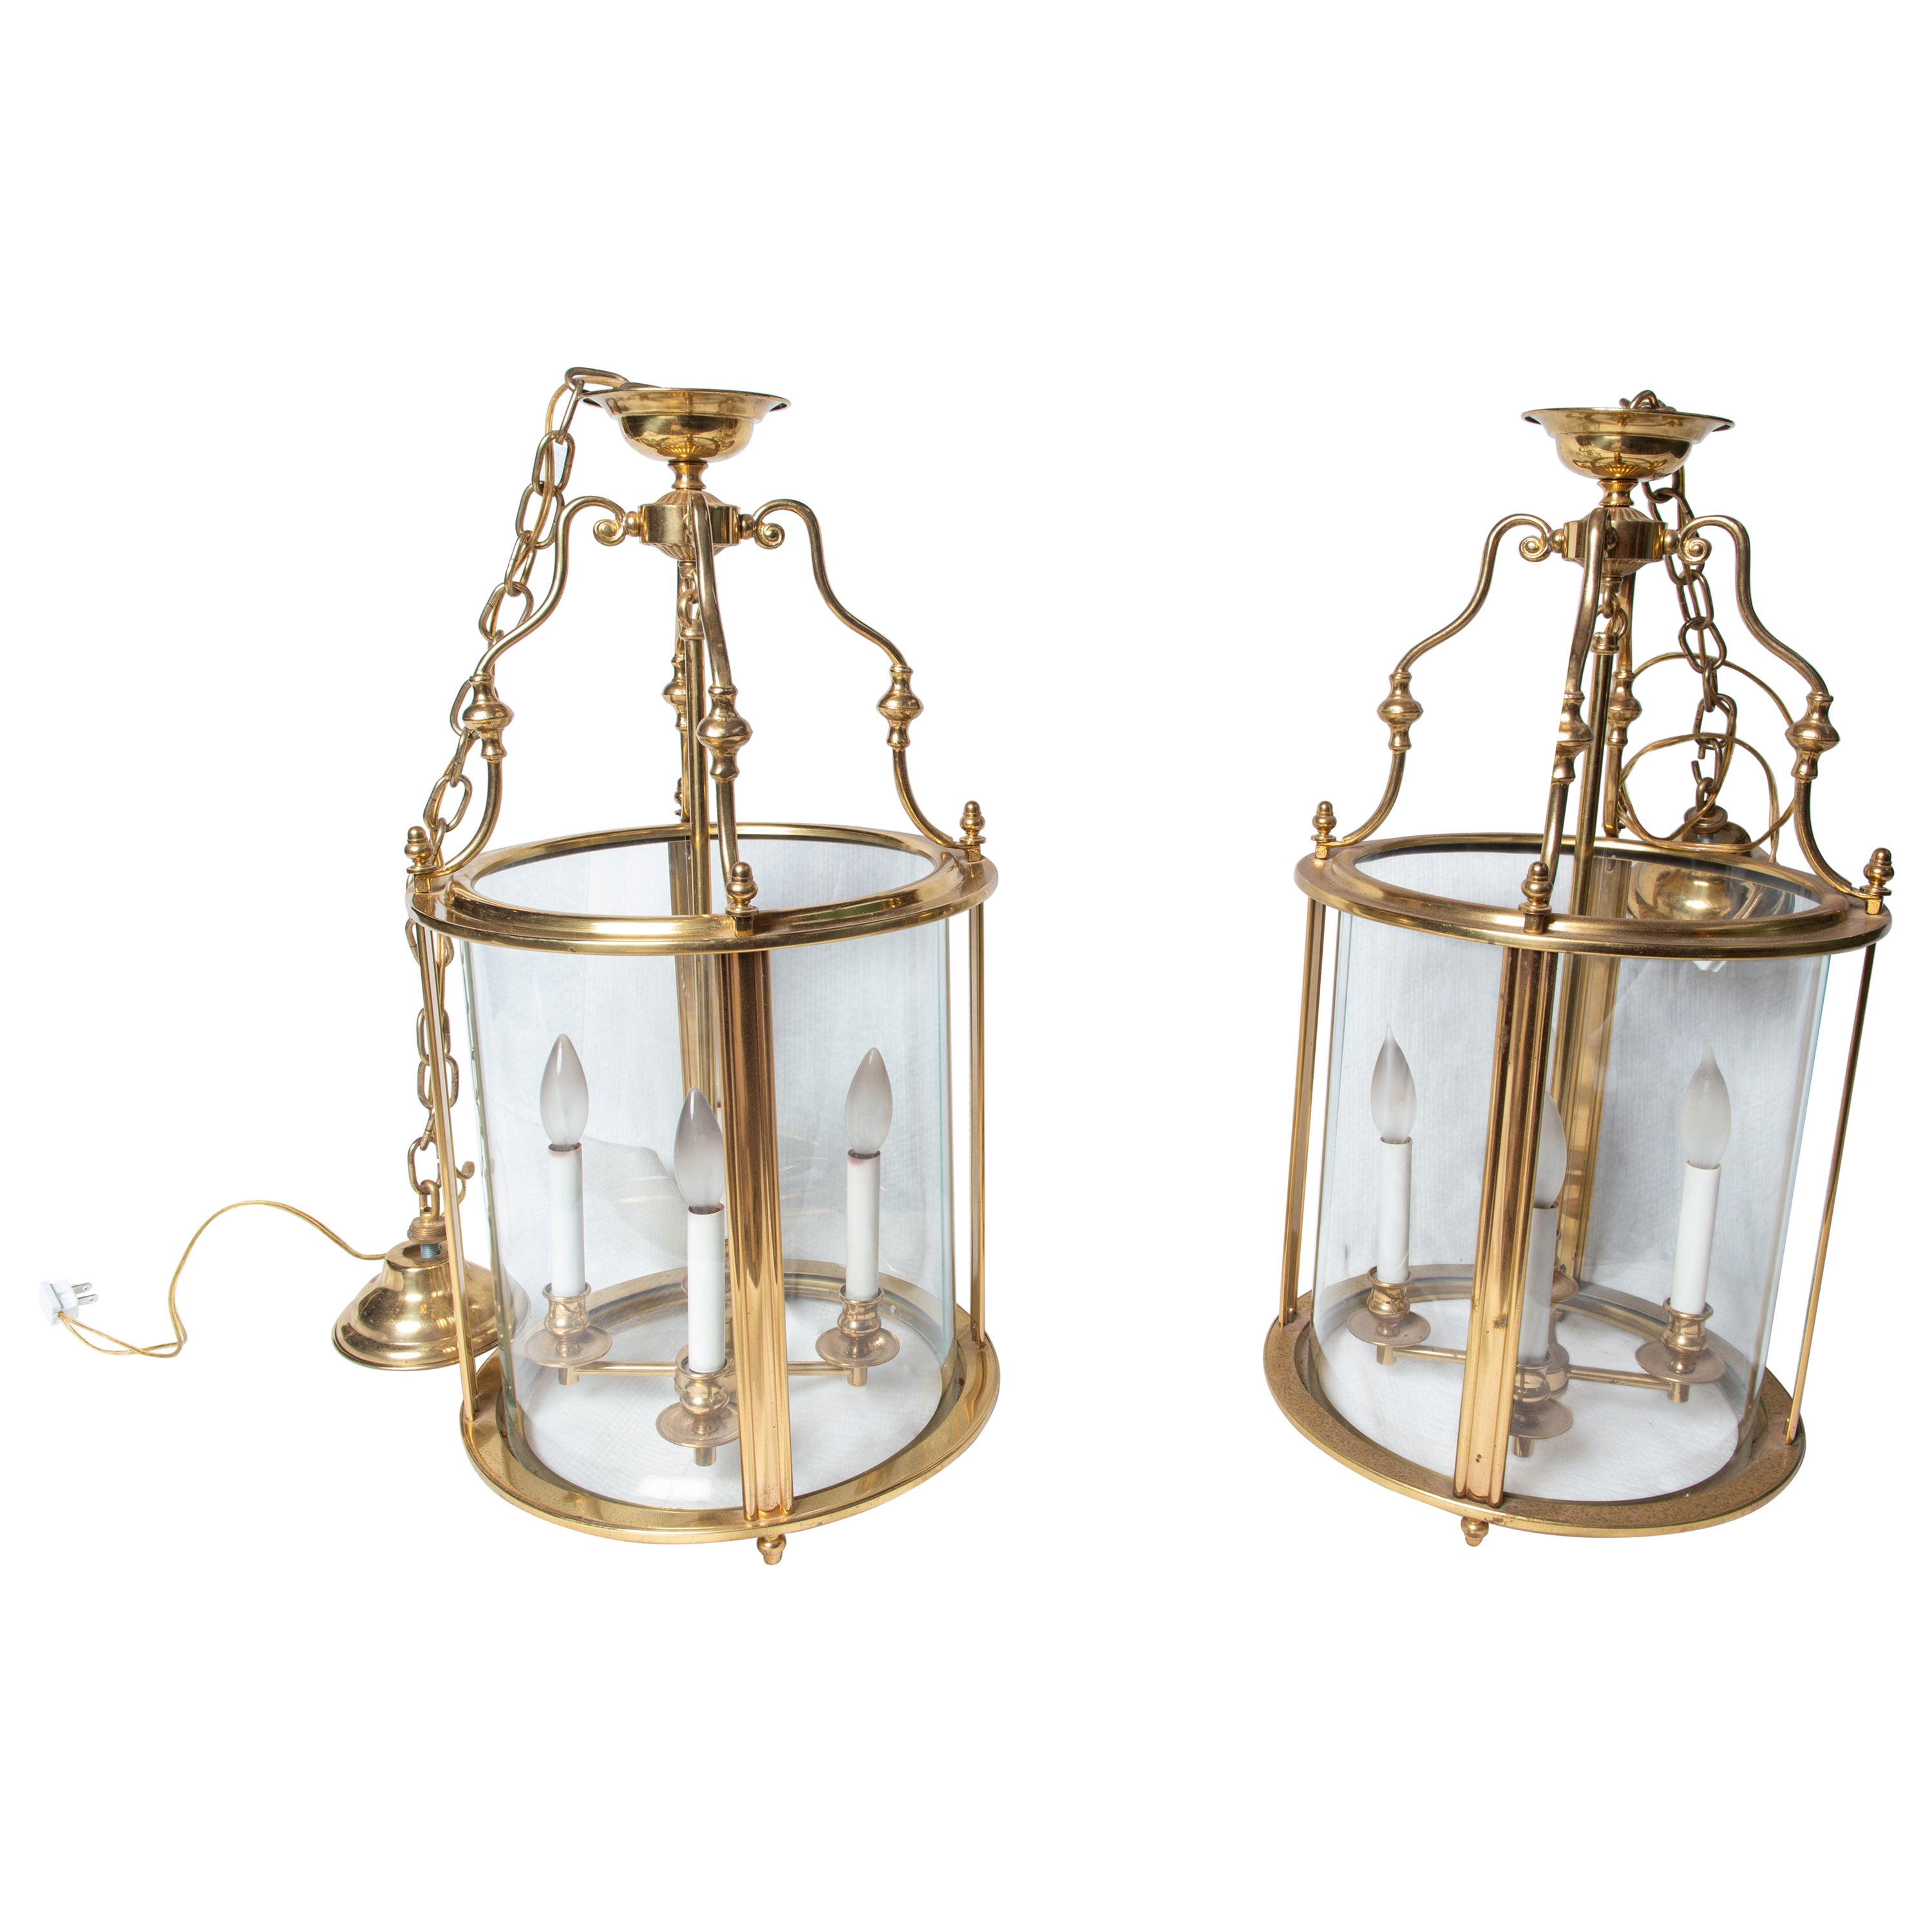 Two Classical Four Light Brass Lanterns, Cylindrical For Sale